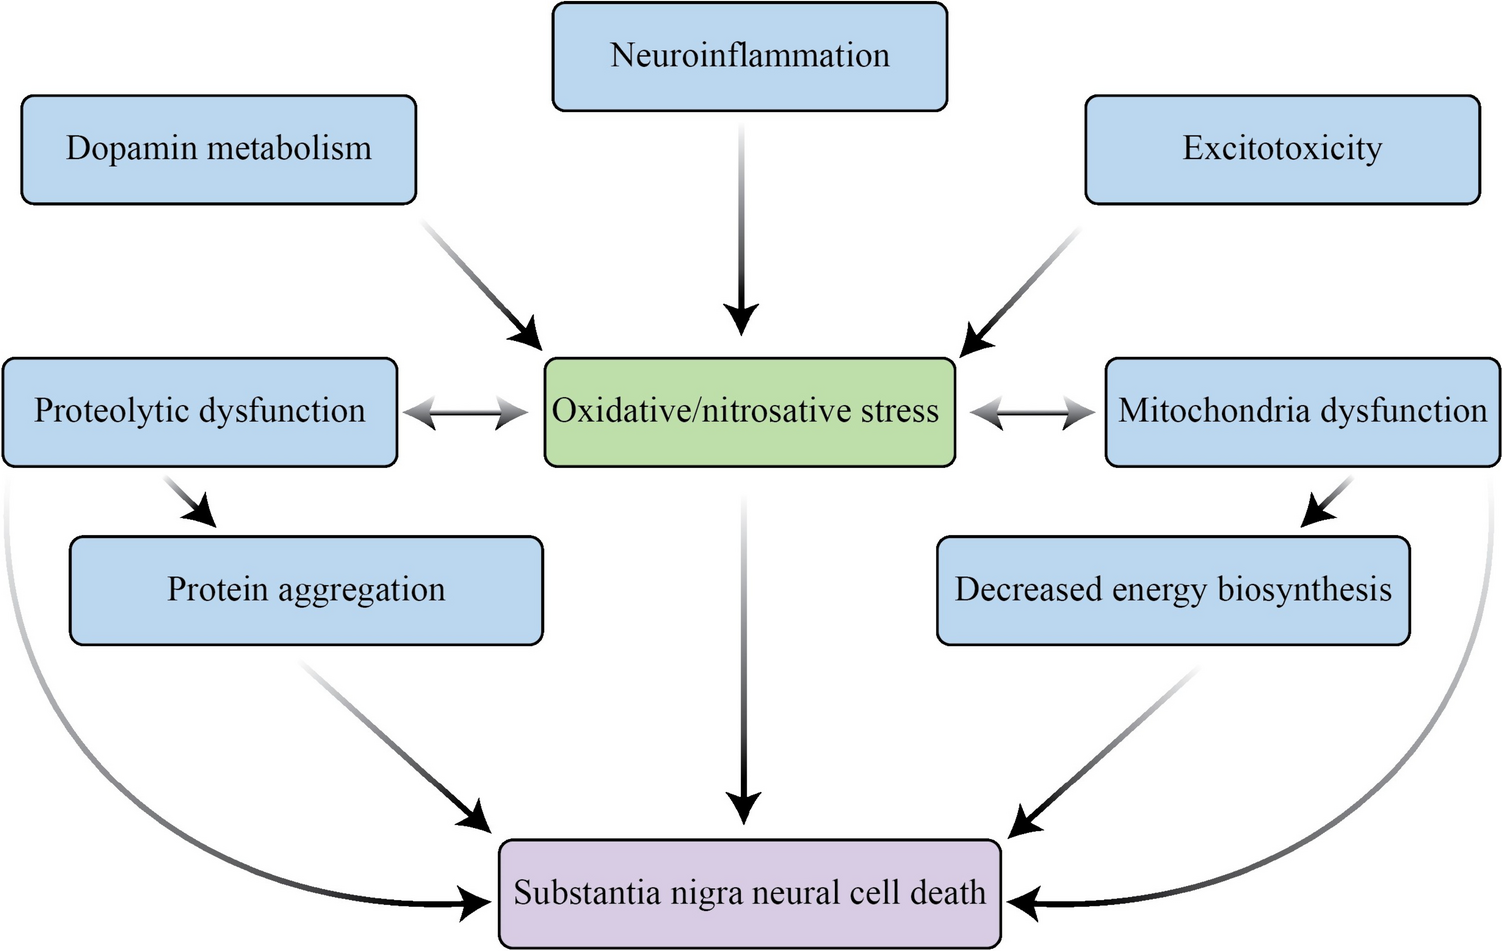 The Interaction Between Nutraceuticals and Gut Microbiota: a Novel Therapeutic Approach to Prevent and Treatment Parkinson’s Disease